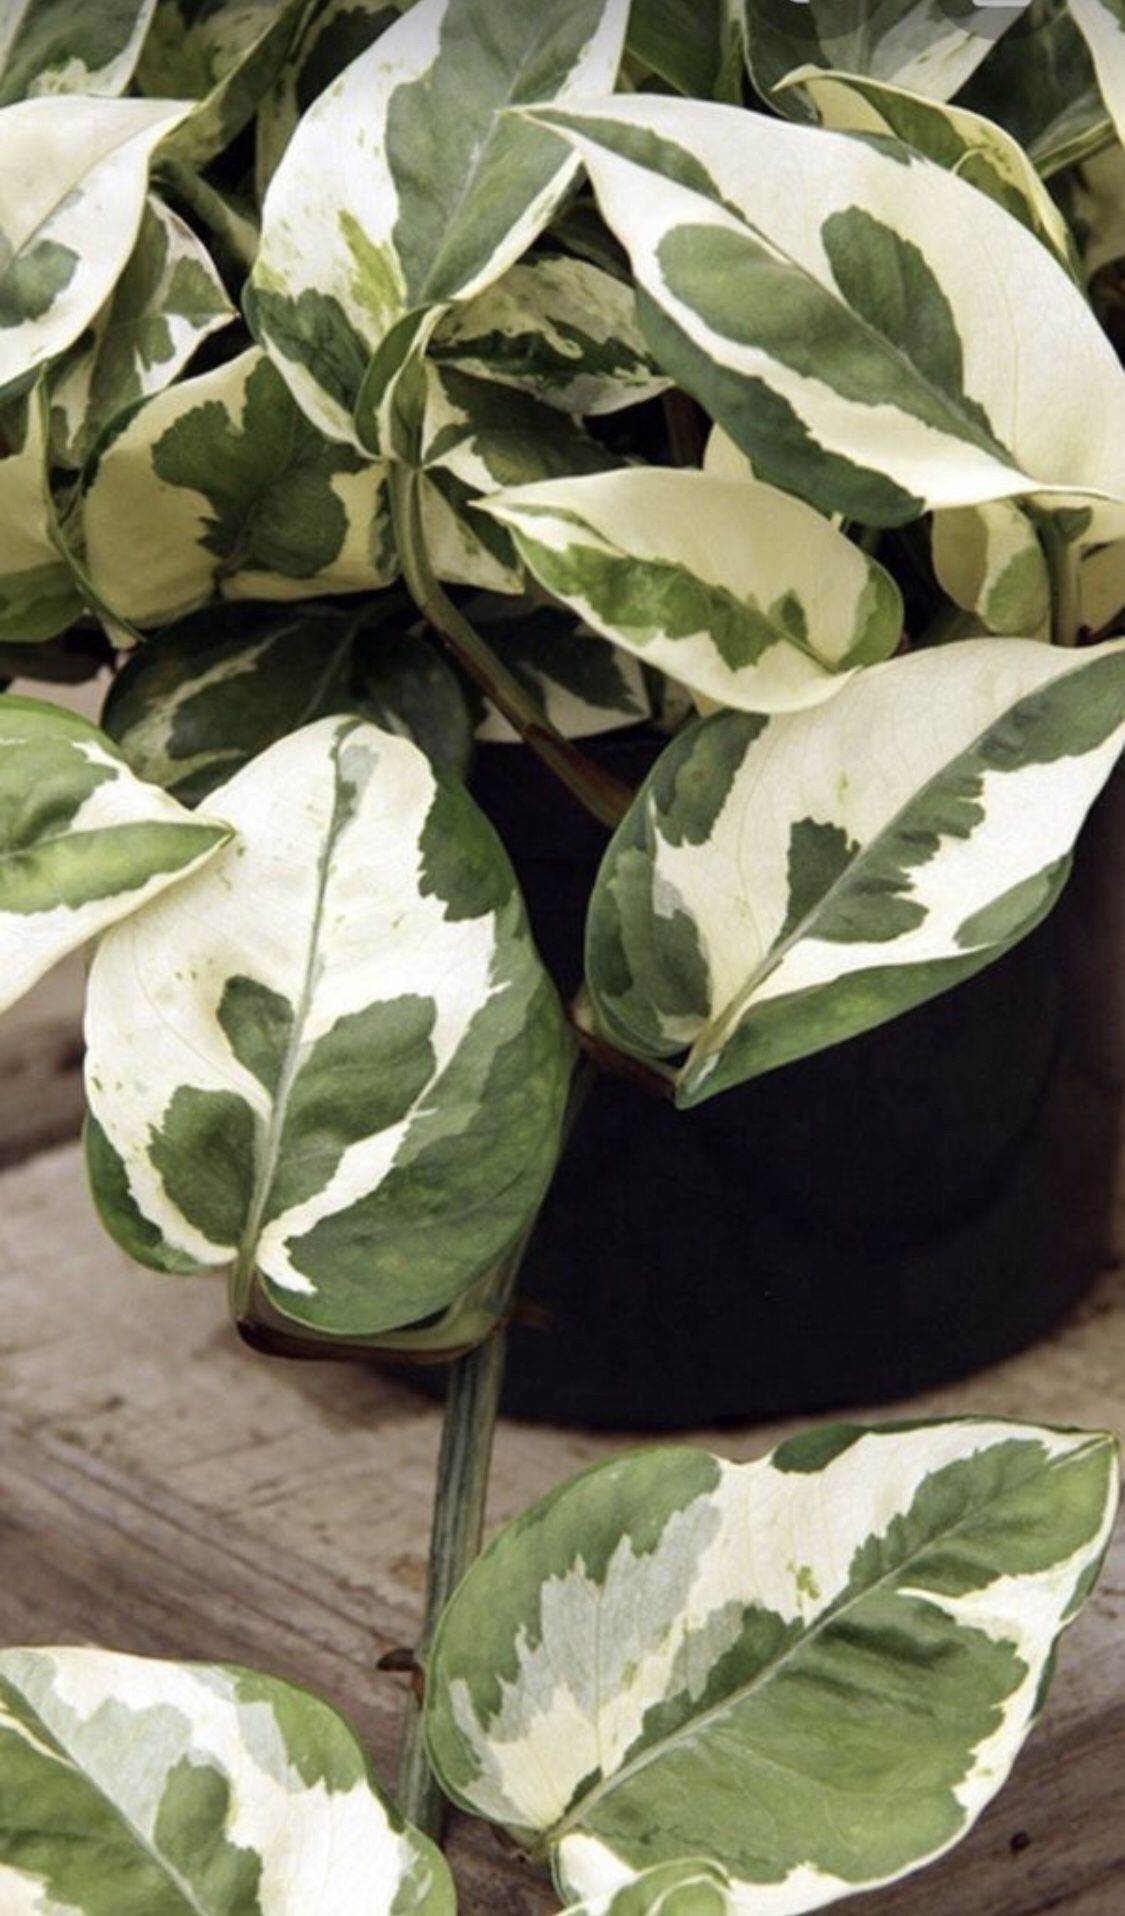 Pothos Epipremnum Aureum 'N'joy' in 4 inch pot Lush and beautiful Tropical Vining Variegated House Plant Similar to Pearls and Jade